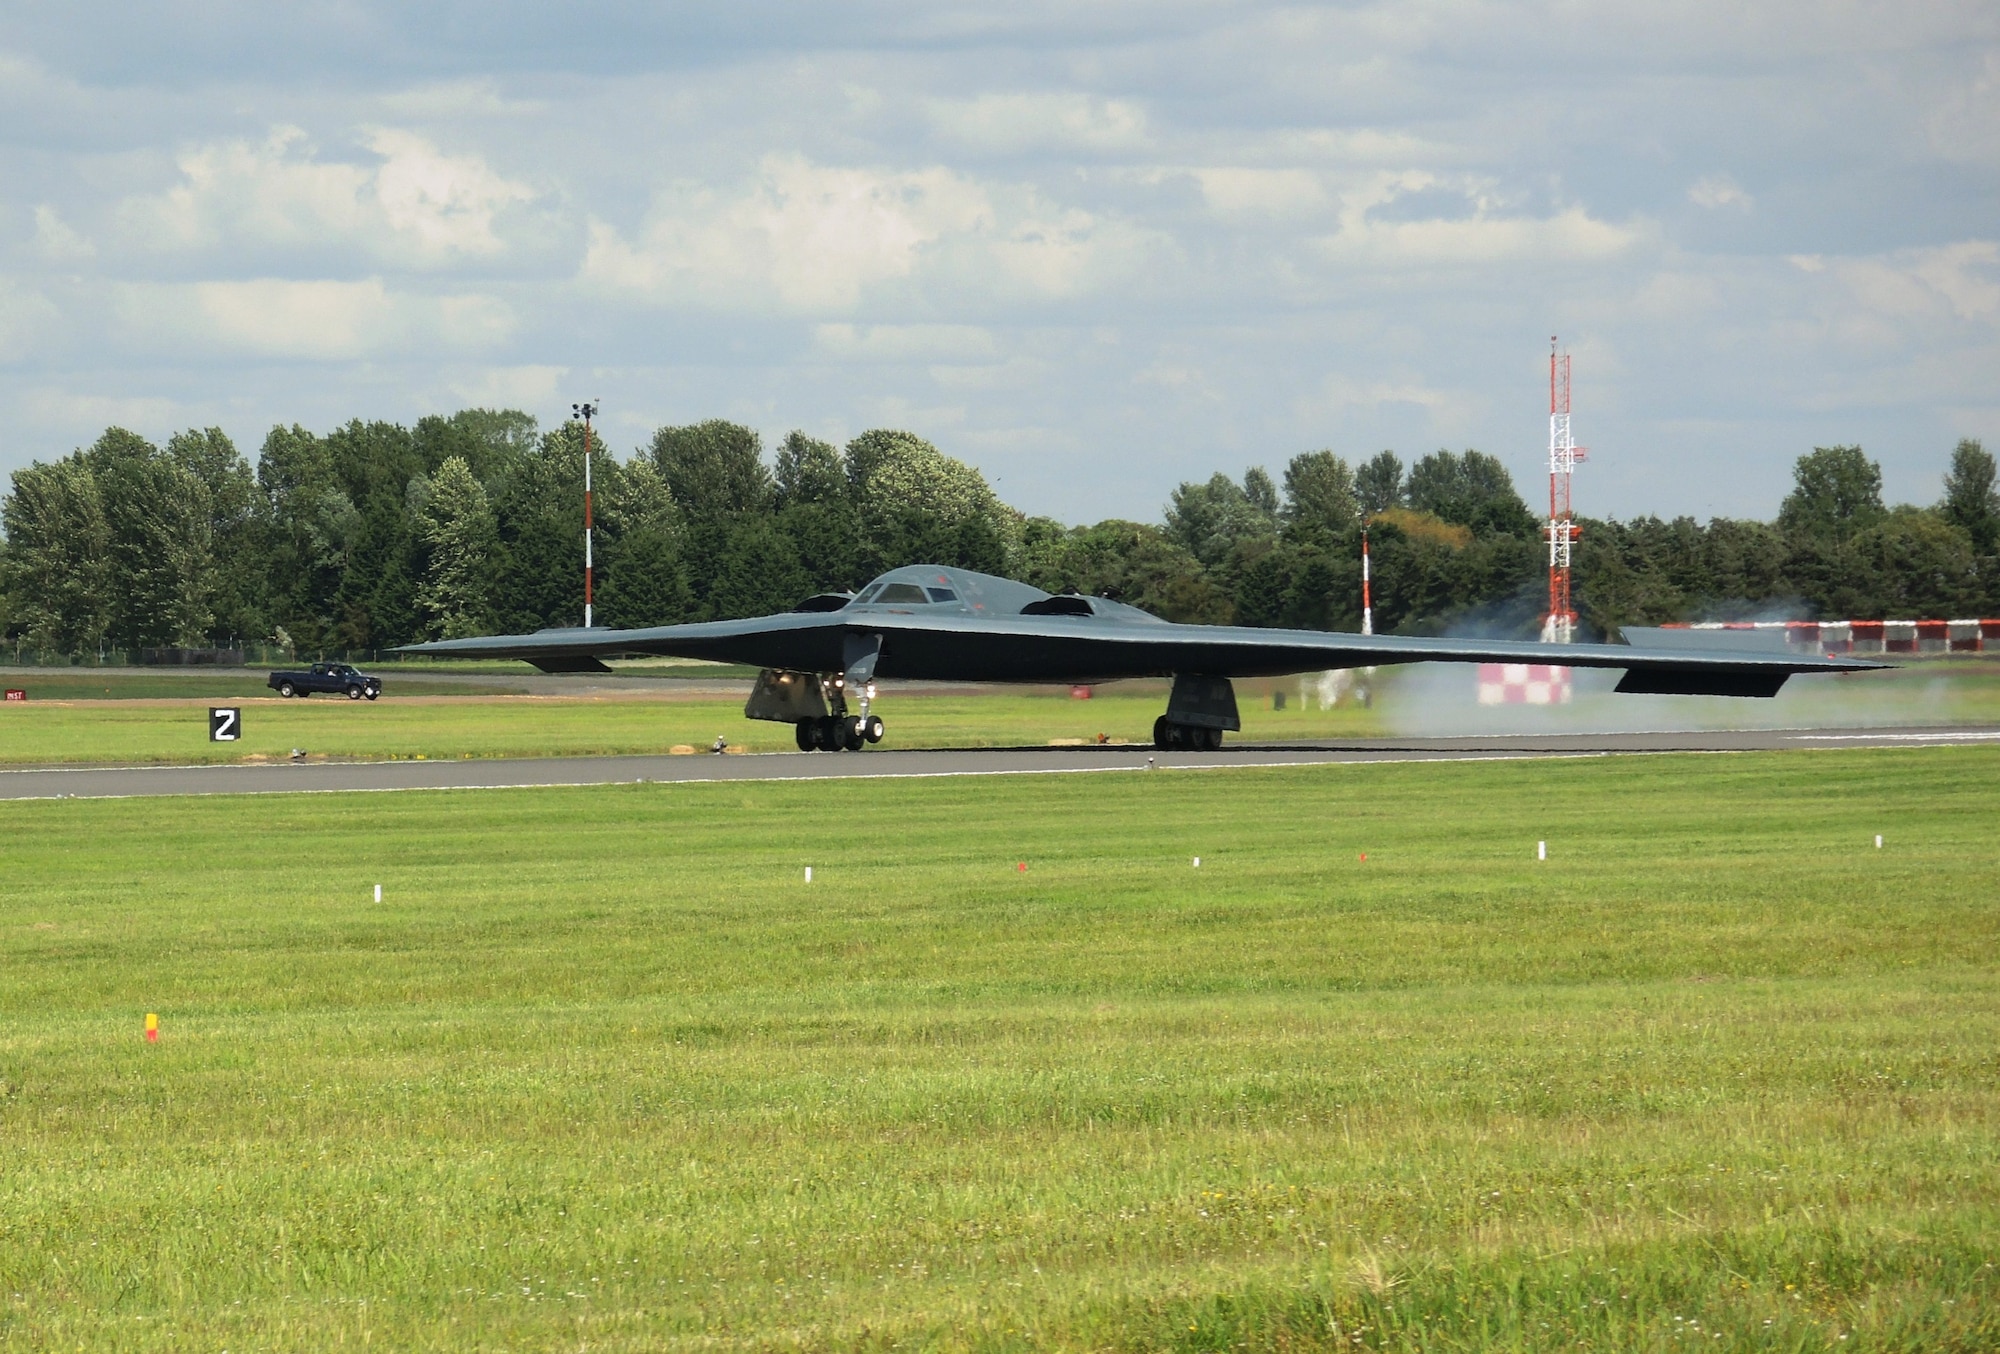 A B-2 Spirit from Whiteman Air Force Base, Missouri, lands at RAF Fairford, England June 8, 2014. Two B-2 Spirits from Whiteman flew to the U.S. European Command area of to train and integrate with U.S. and allied military forces in the region. (U.S. Air Force photo by Candy Knight/Released)